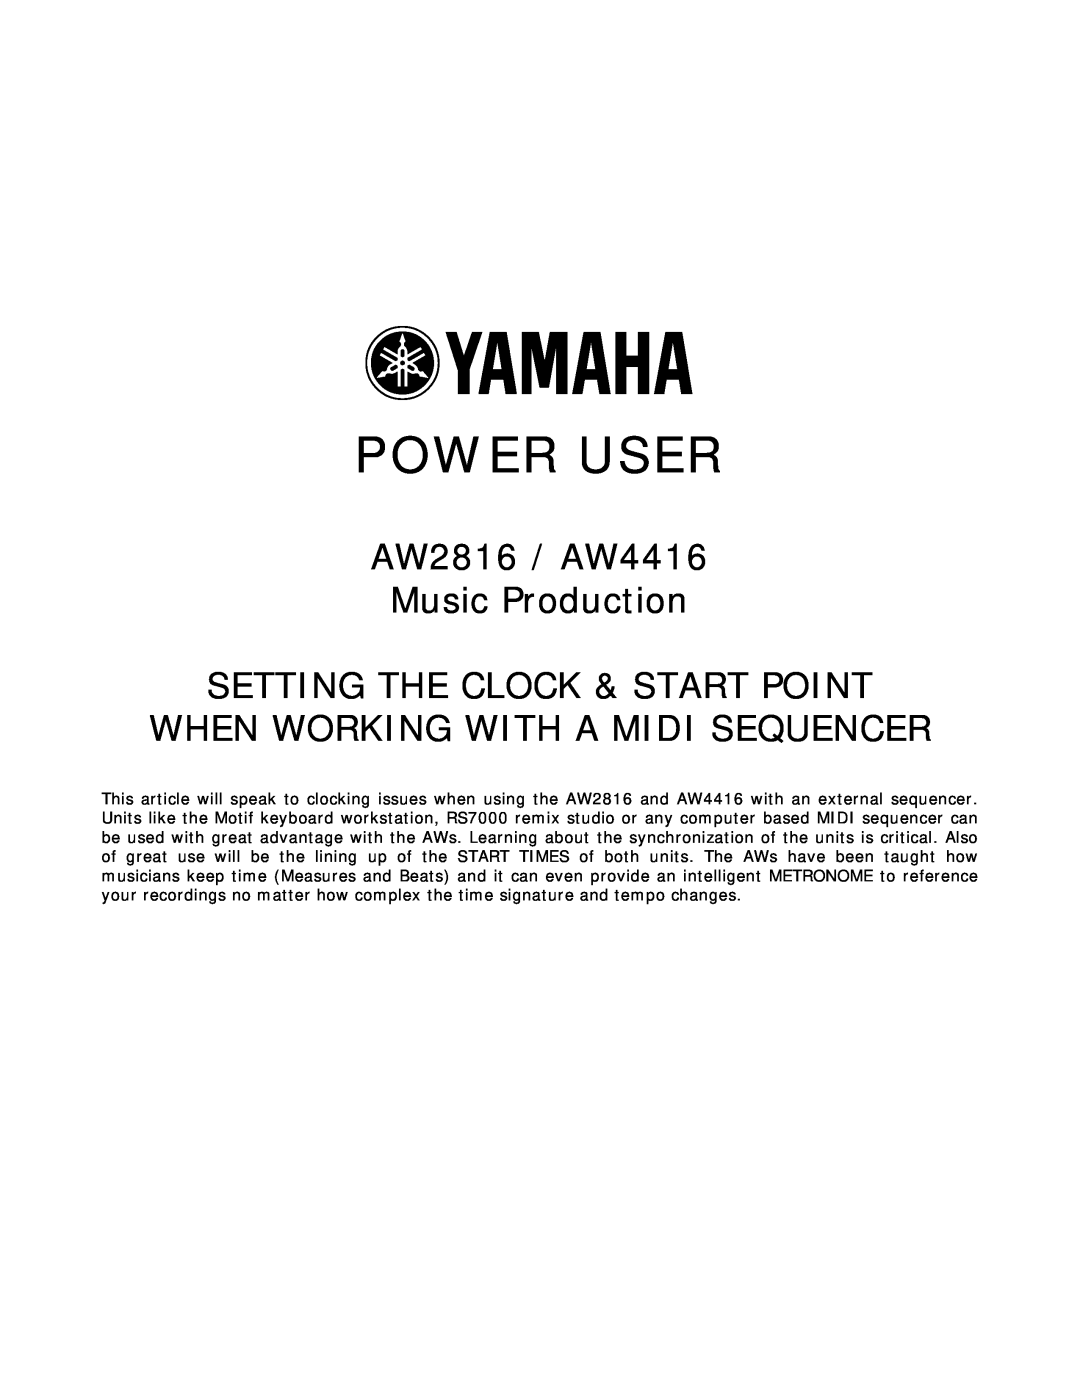 Yamaha manual Power User, AW2816 / AW4416 Music Production, Setting The Clock & Start Point 